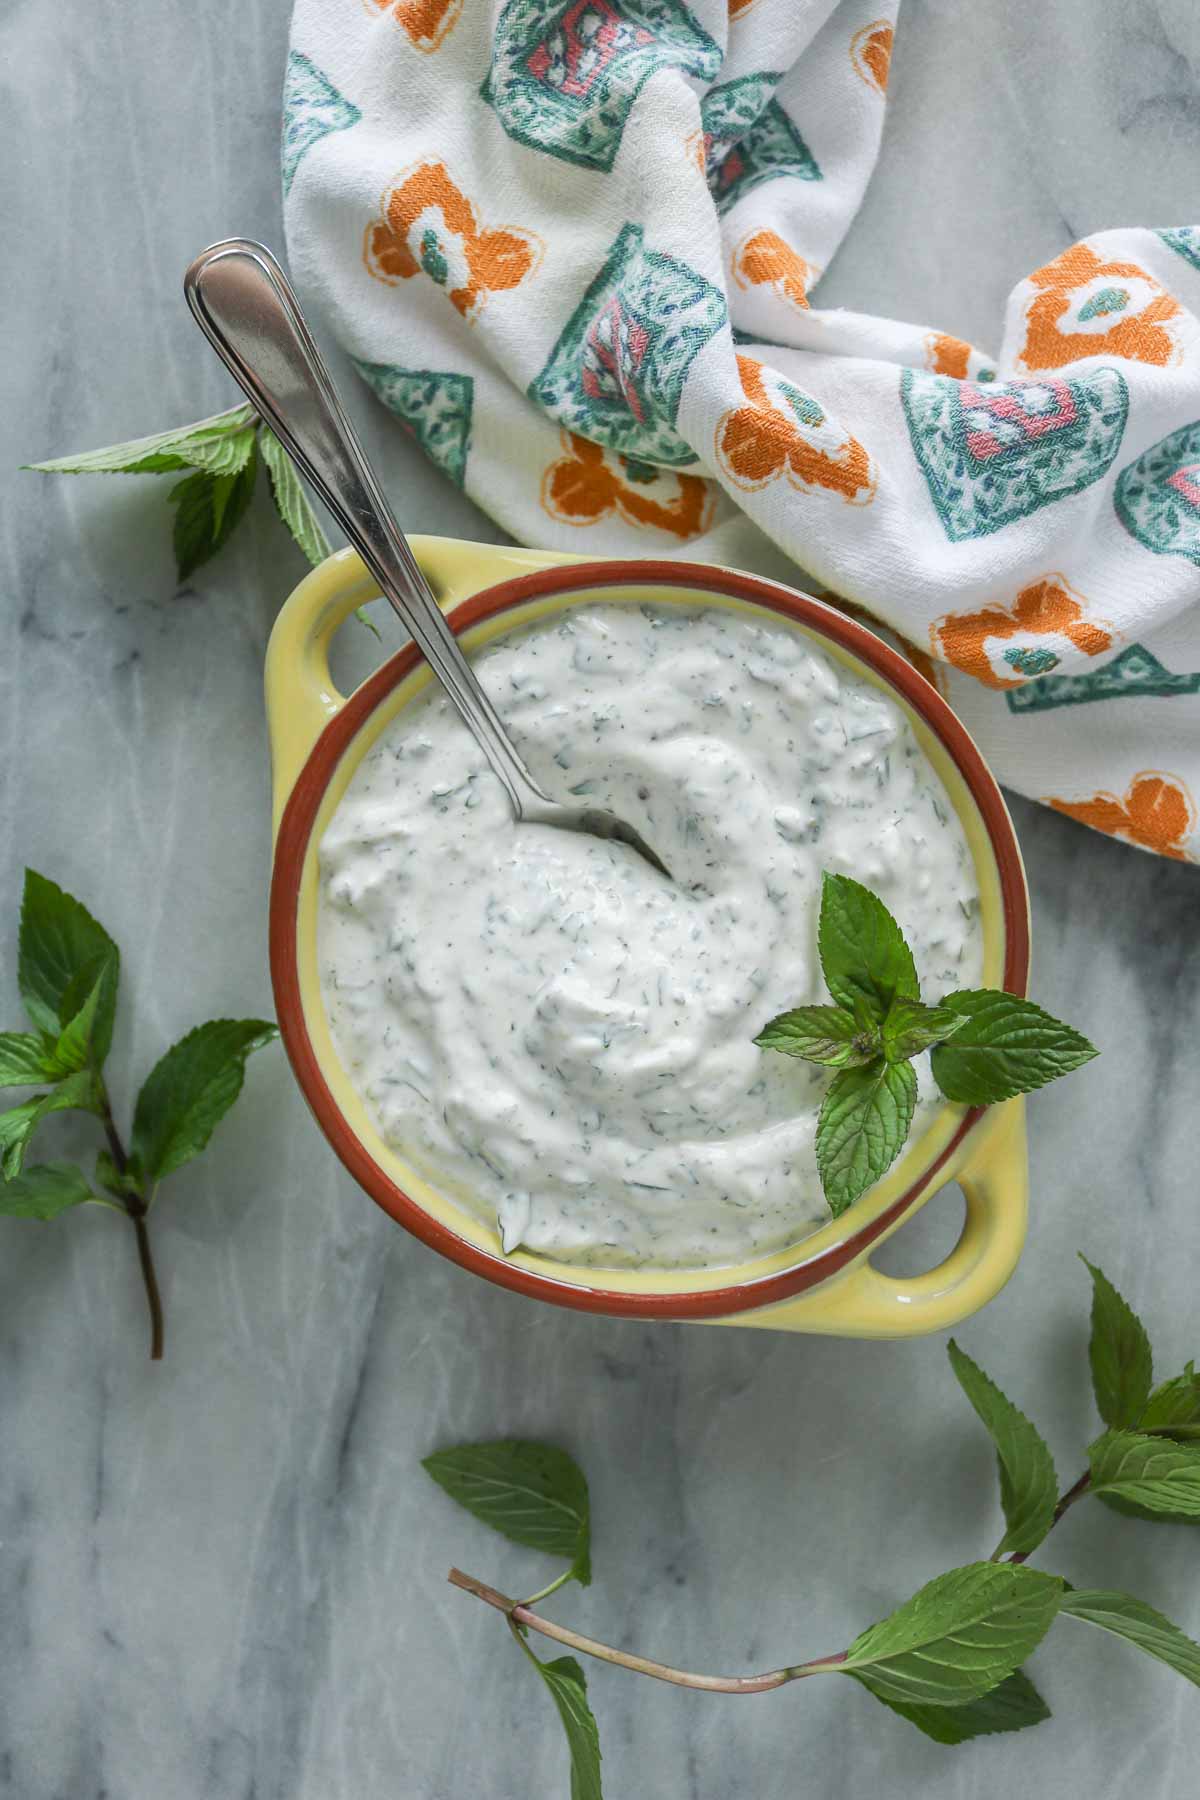 Mint yogurt sauce in a yellow bowl with a spoon.